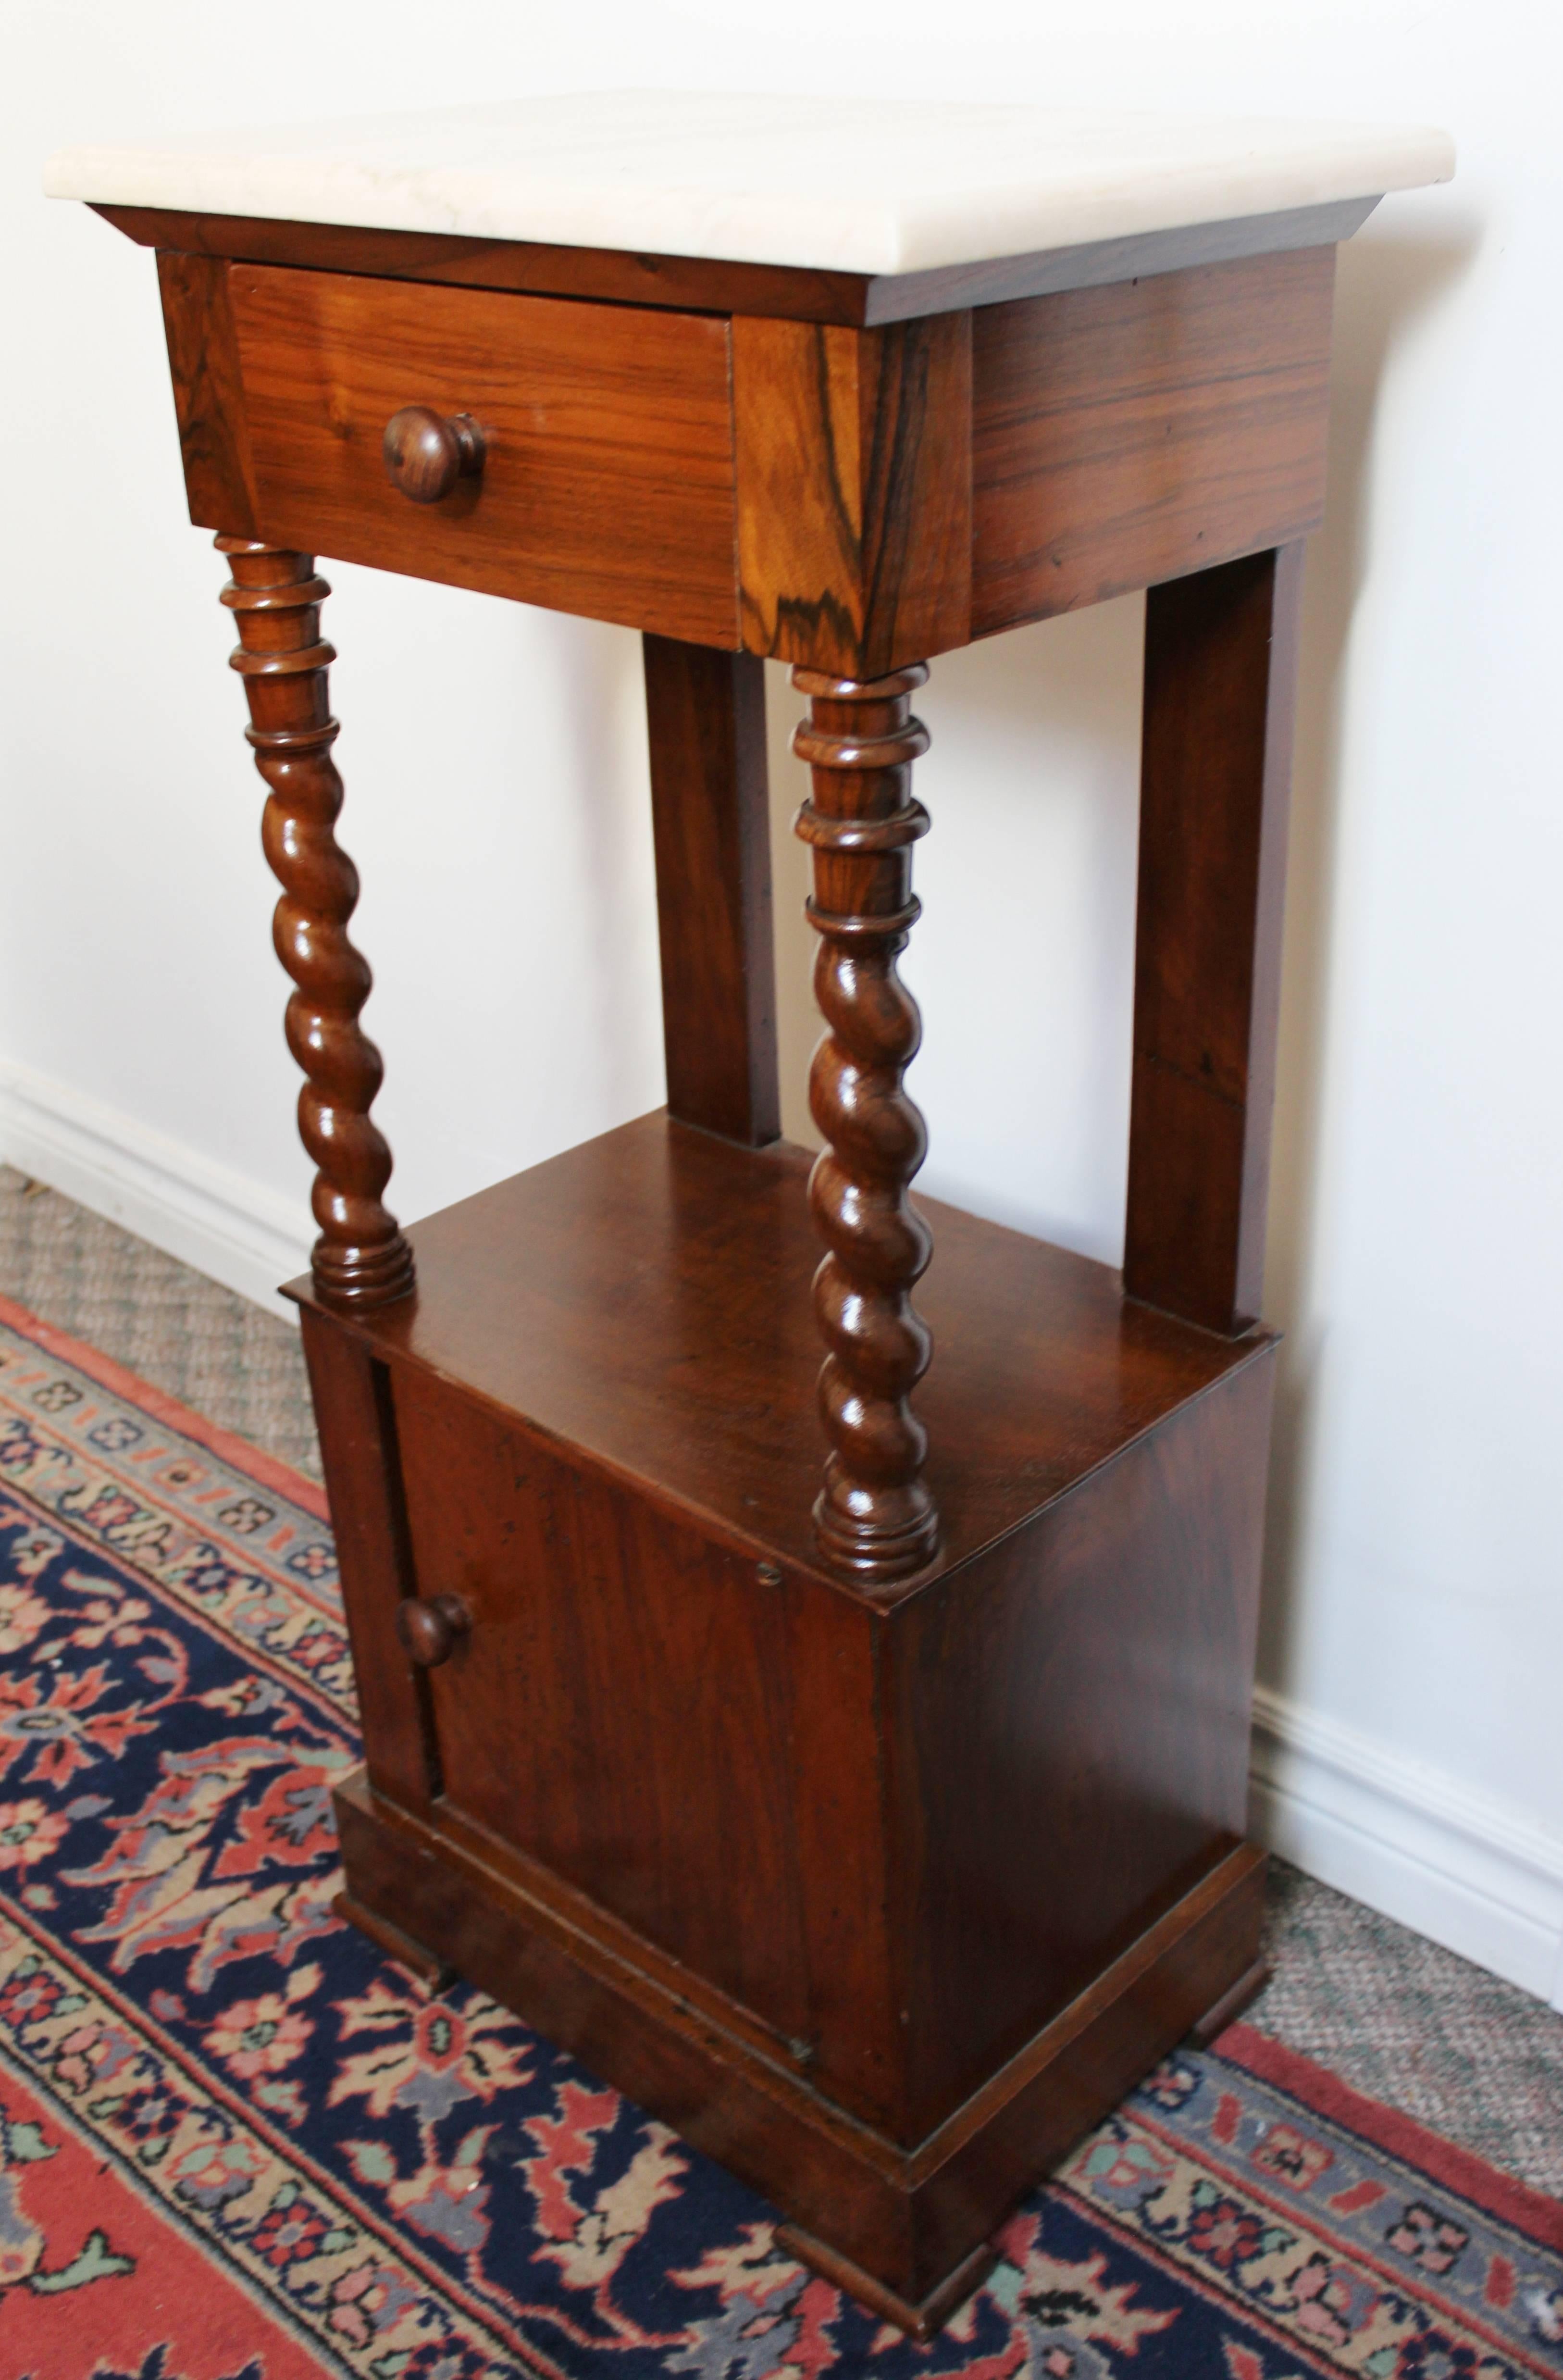 Early 19th century French barley twists night table or stand with marble top.